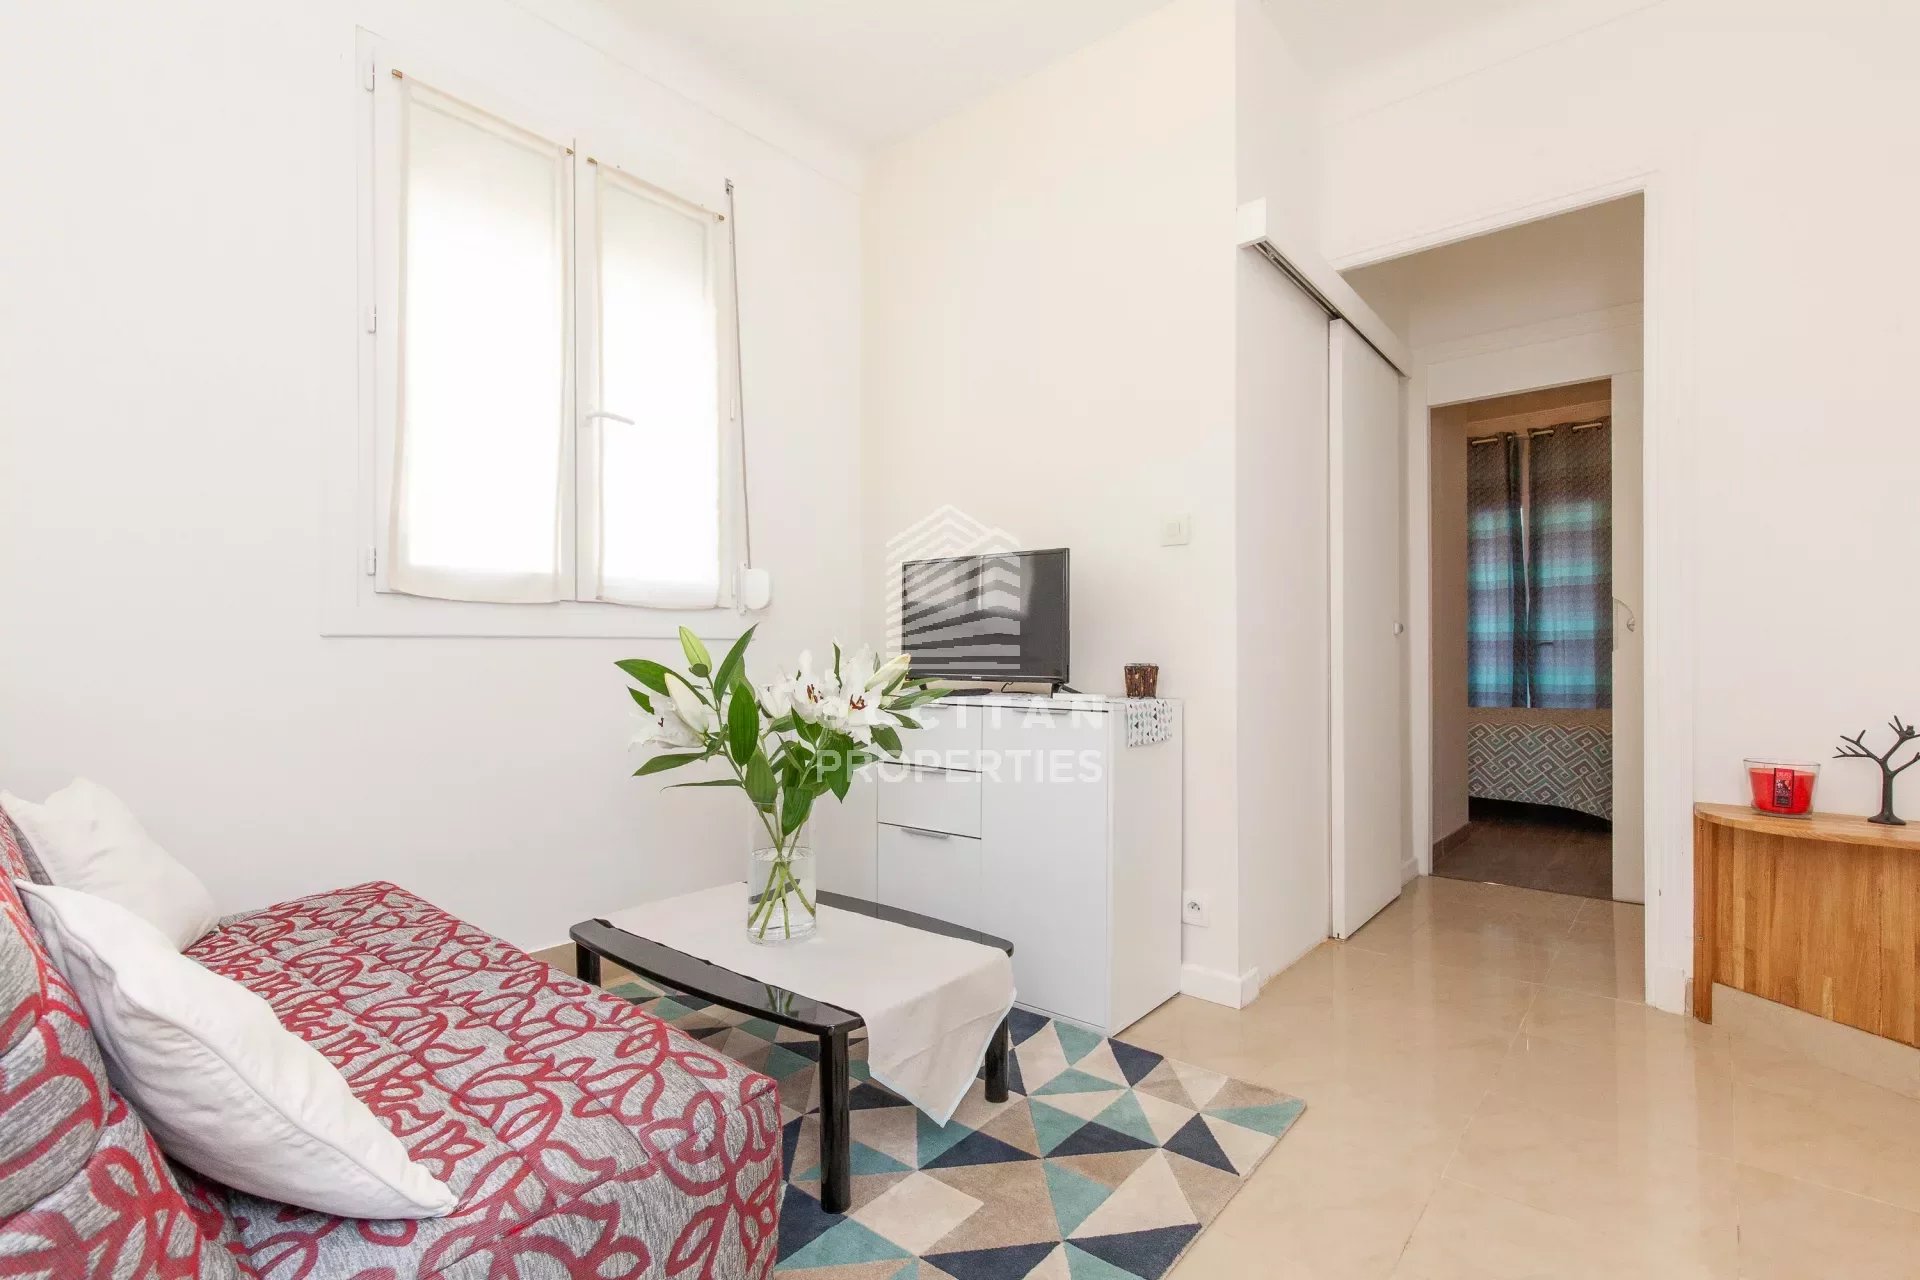 15 minutes by walk from rue d'Antibes - Balcony